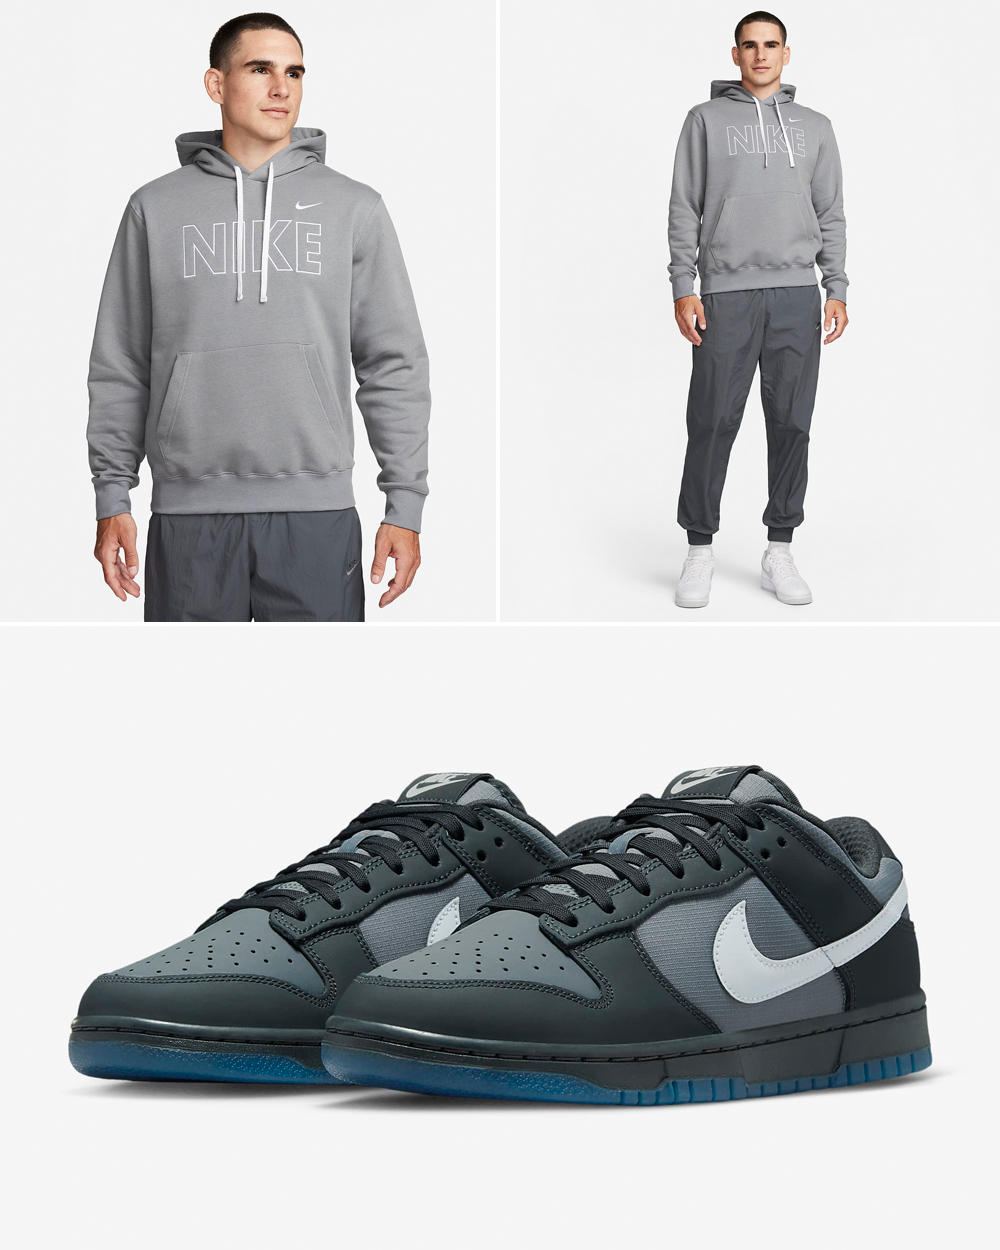 Nike-Dunk-Low-Anthracite-Outfits